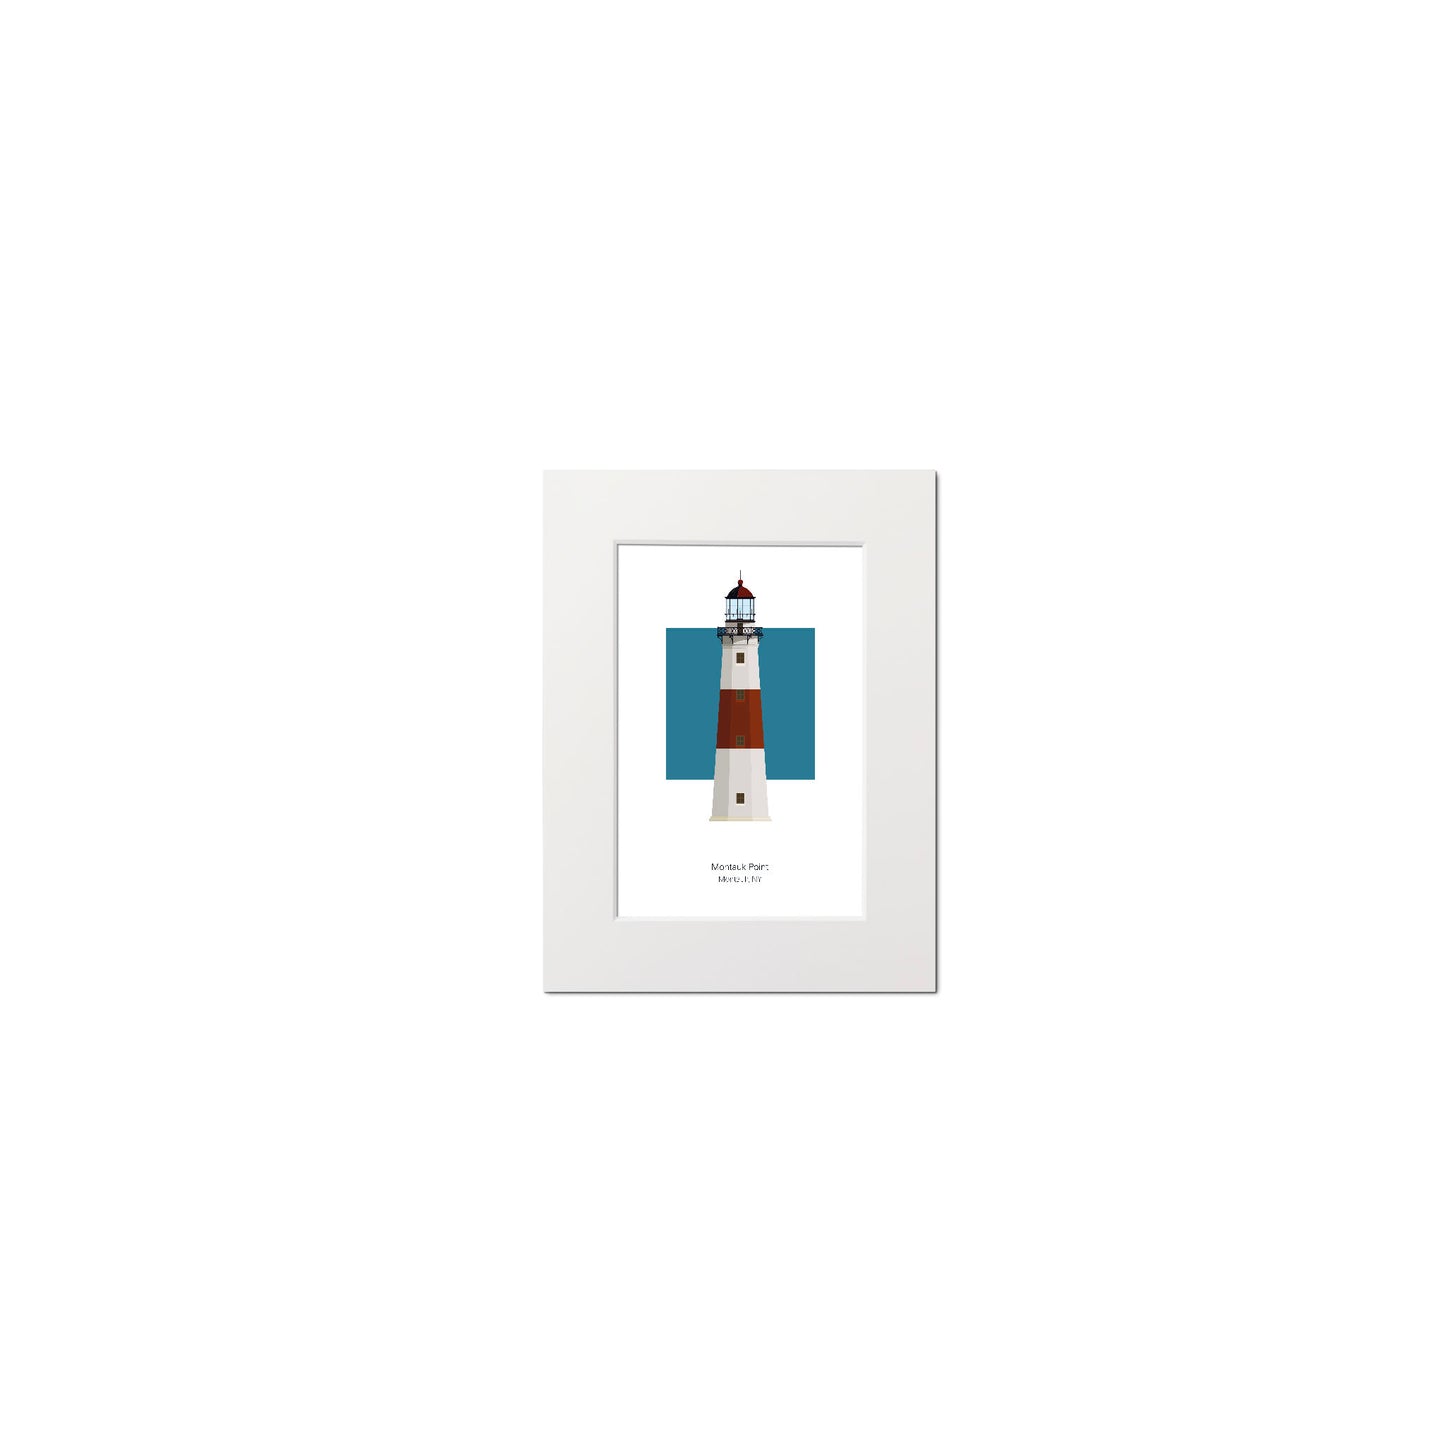 Illustration of the Montauk Point lighthouse, New York, USA. On a white background with aqua blue square as a backdrop., mounted and measuring 6"x8" (15x20cm).